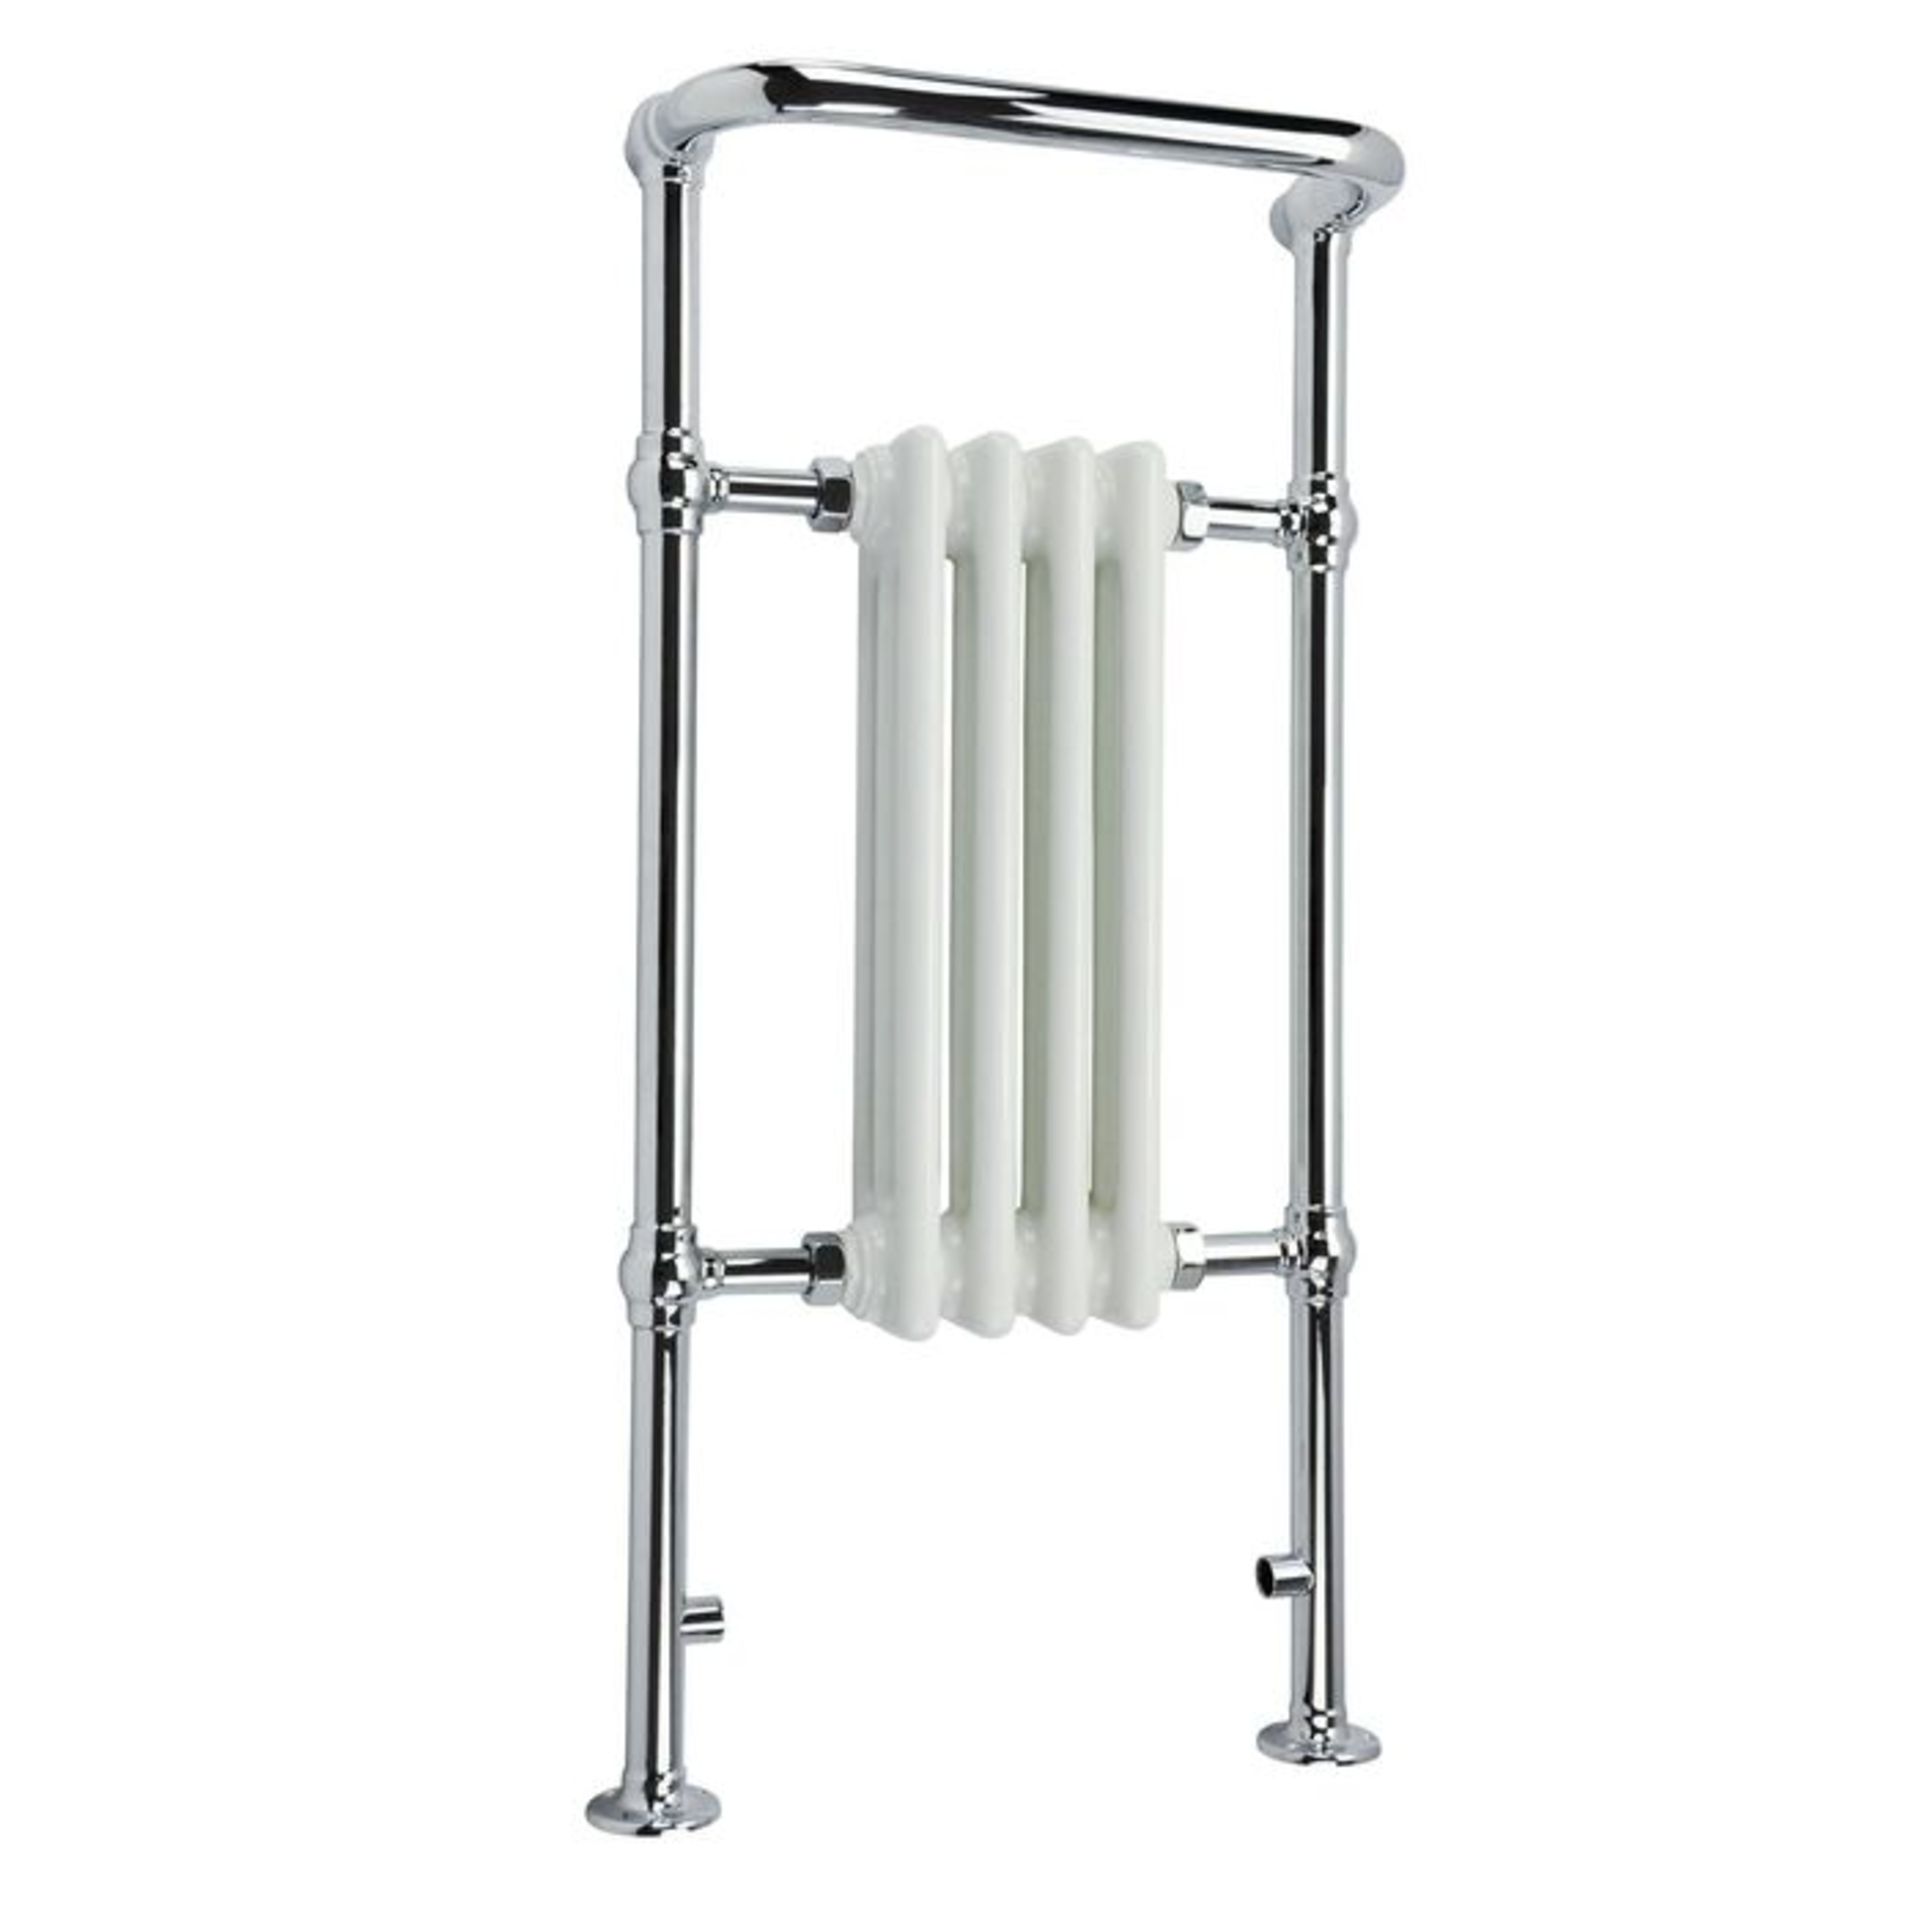 (Z54) 952x479mm Small Traditional White Towel Rail Radiator - Cambridge. RRP £449.99. We love ... - Image 3 of 3